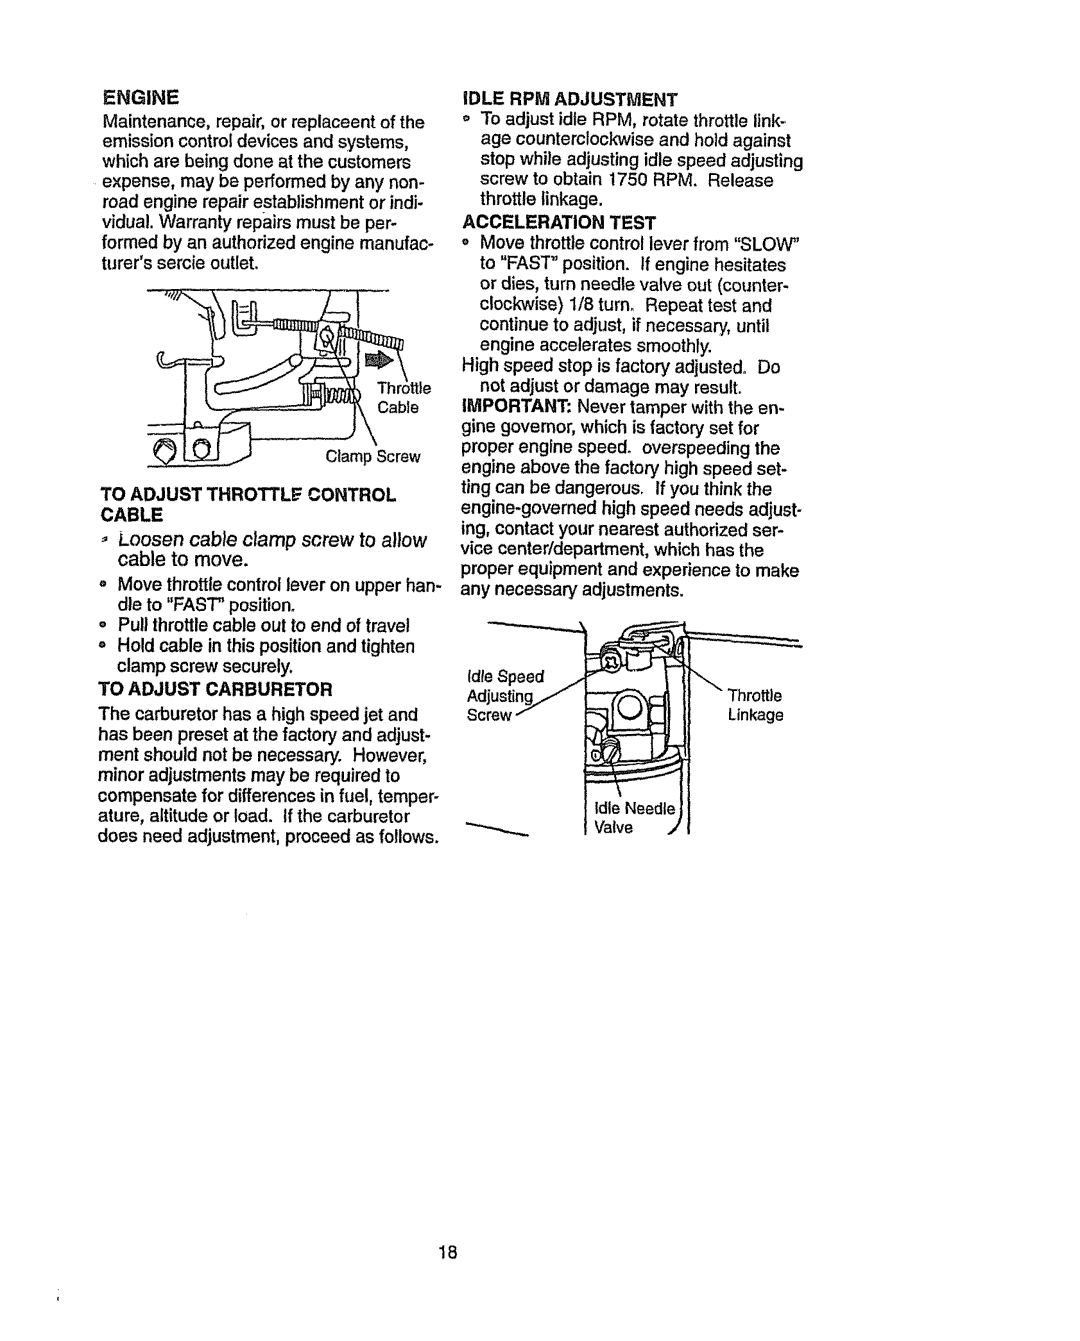 Craftsman 917.2933 owner manual Engine, Loosen cable clamp screw to allow cable to move 